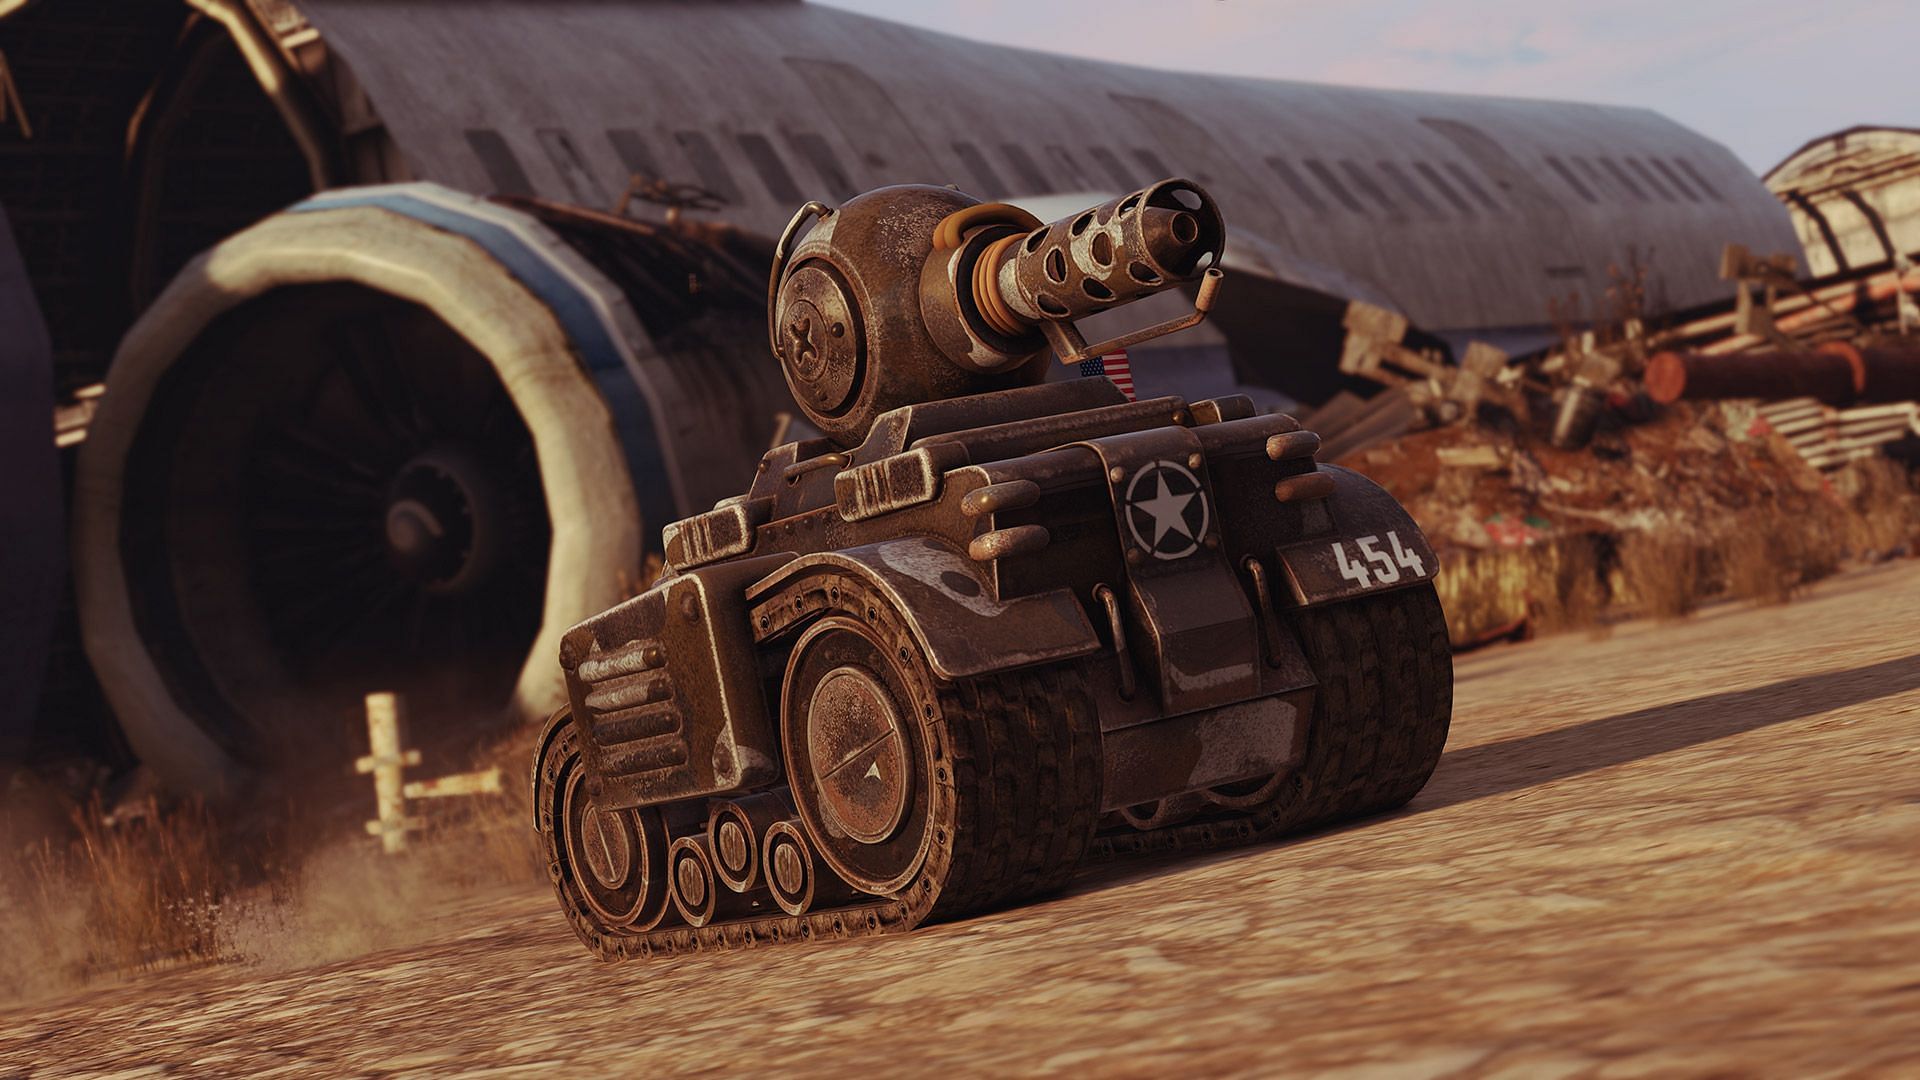 Another image featuring this tank (Image via Rockstar Games)